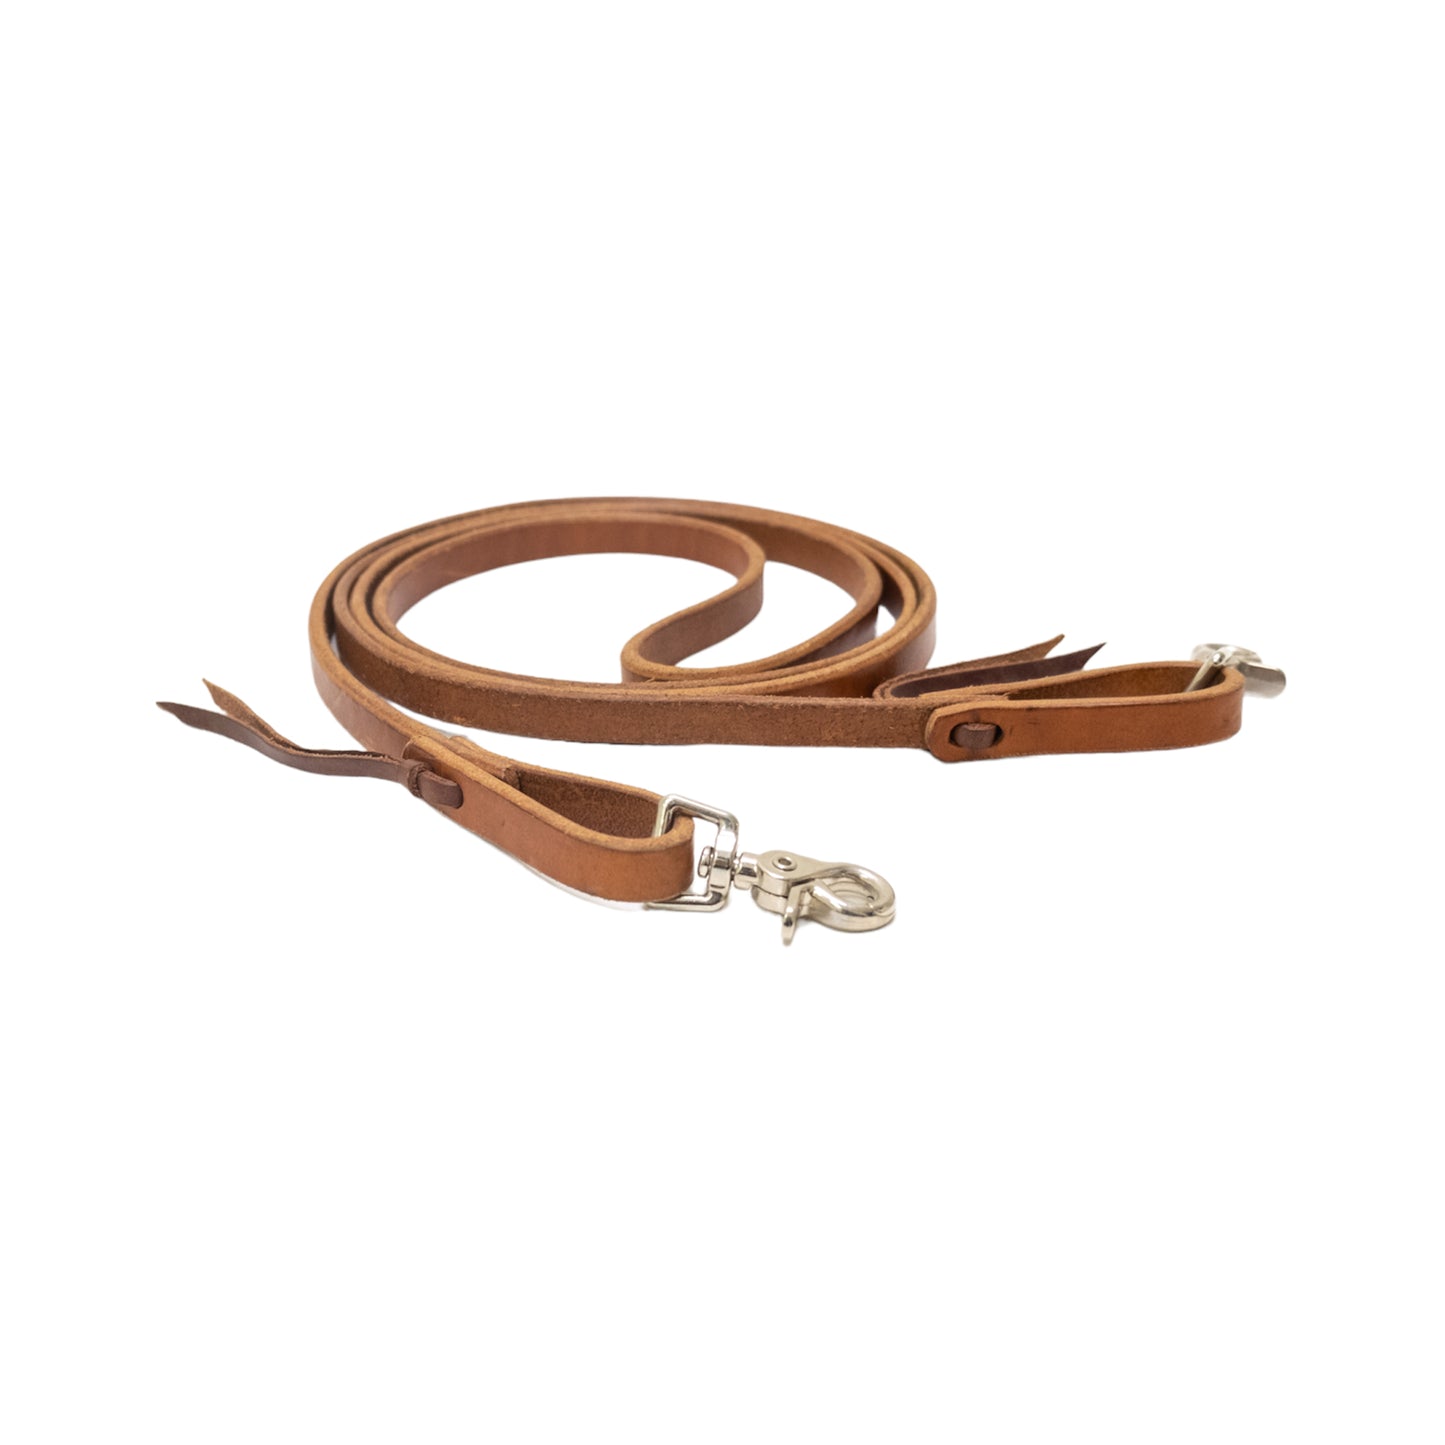 5/8" Roping reins harness leather with snaps.